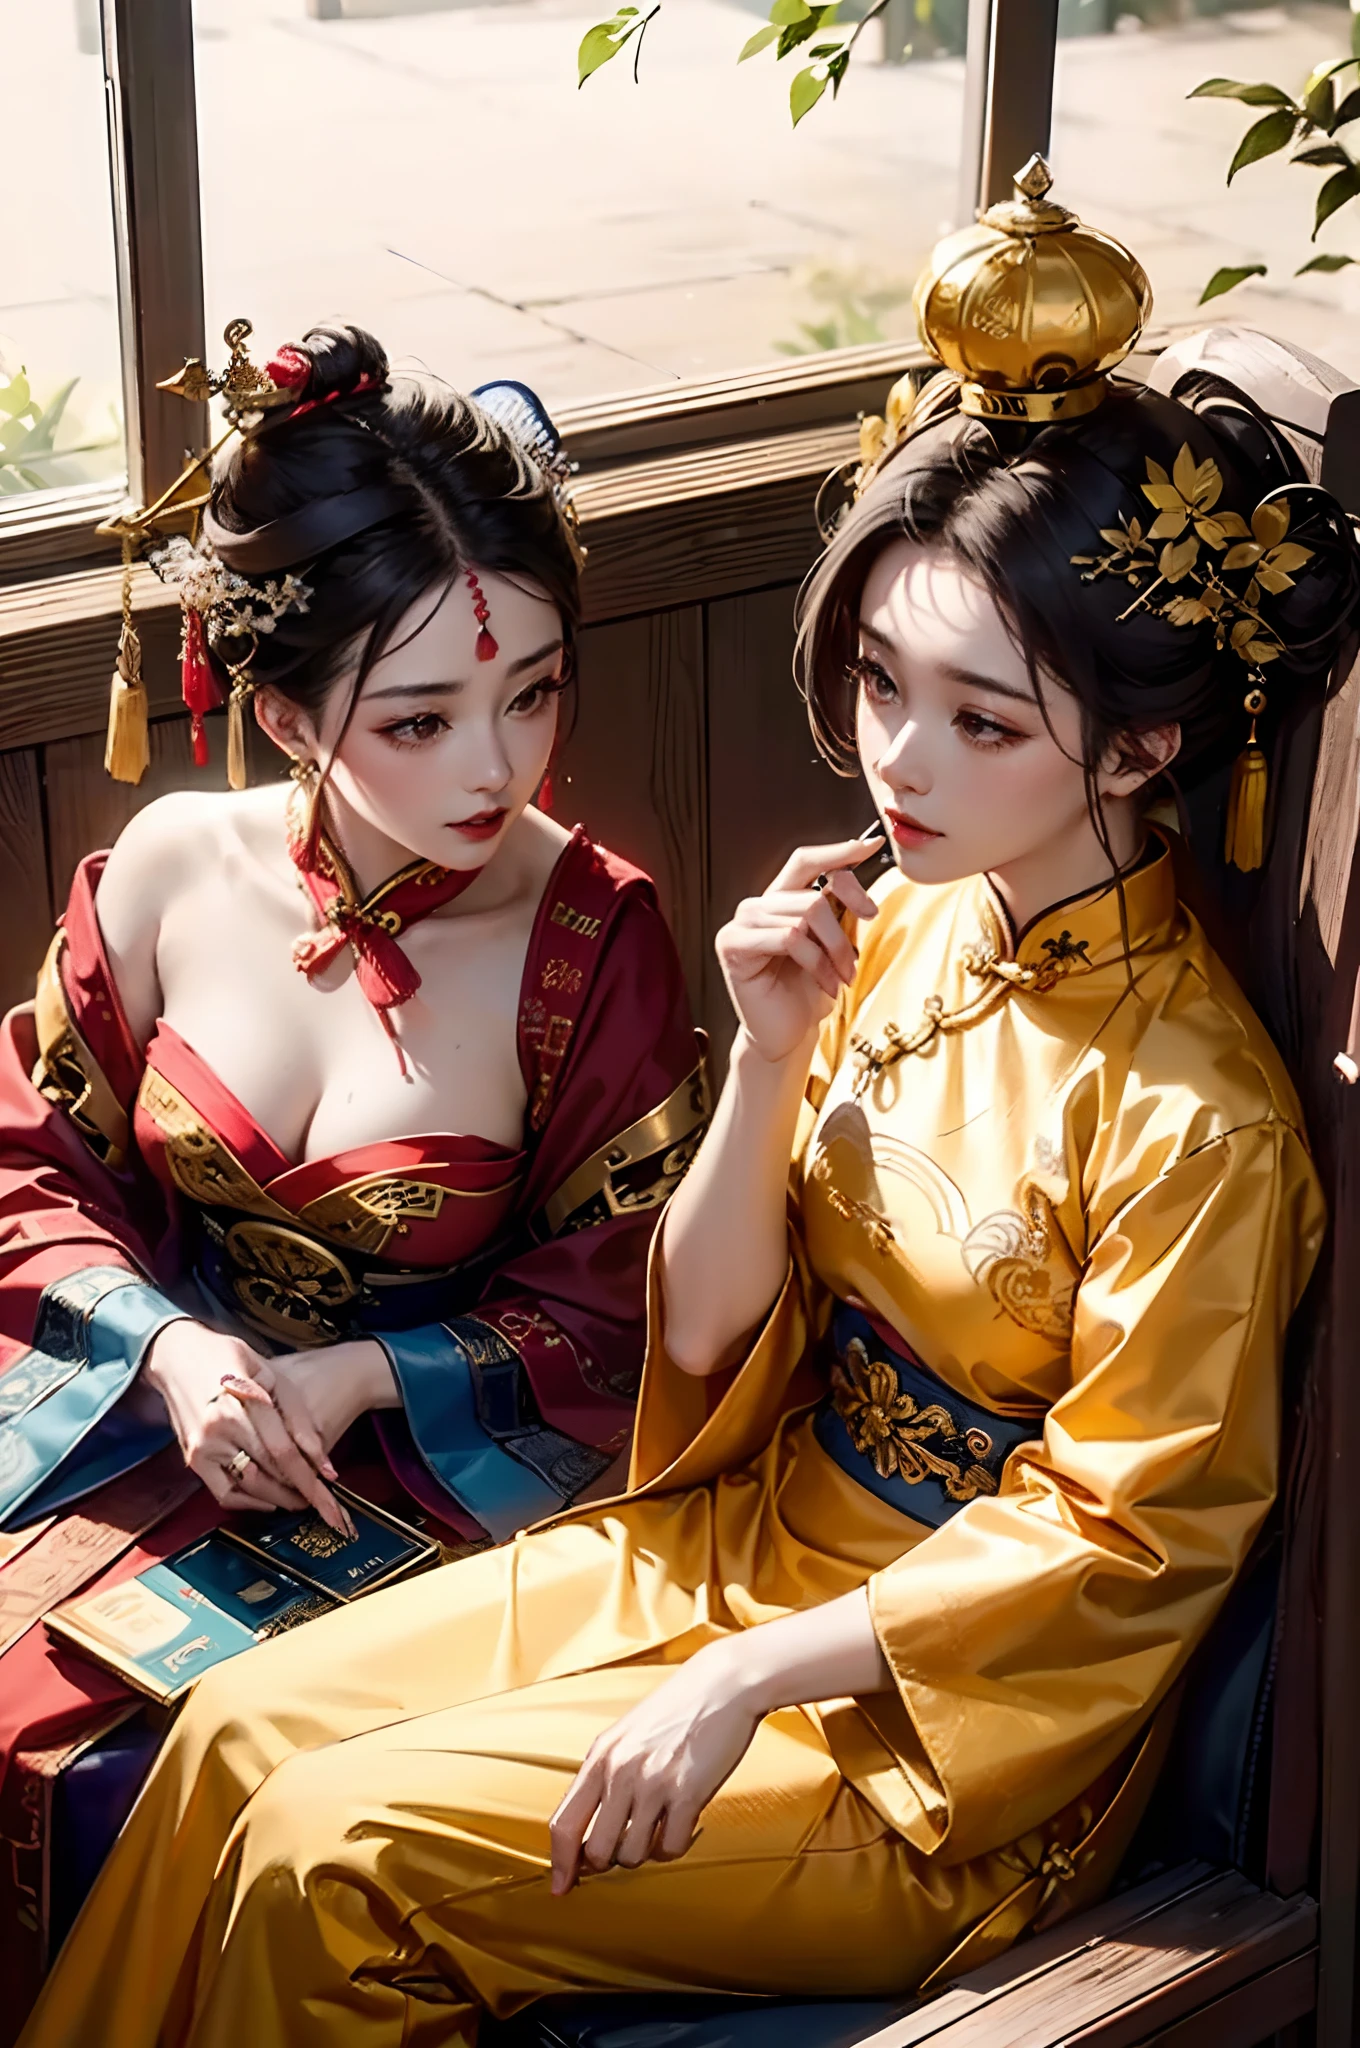 a couple of lesbians sitting together,leering:1.4,Taoist,single hair bun,(An ancient Chinese hairstick on her head:1.5),Use mahogany hairpins,(Revealing a translucent cheongsam),(Urzang-6500-V1.3,PureFace_V1,Octane rendering),Elegant Pose,xxmix girl woman,Perfect composition golden ratio, Masterpiece, Best quality, 4K, Sharp focus. better hands, Perfect anatomy.